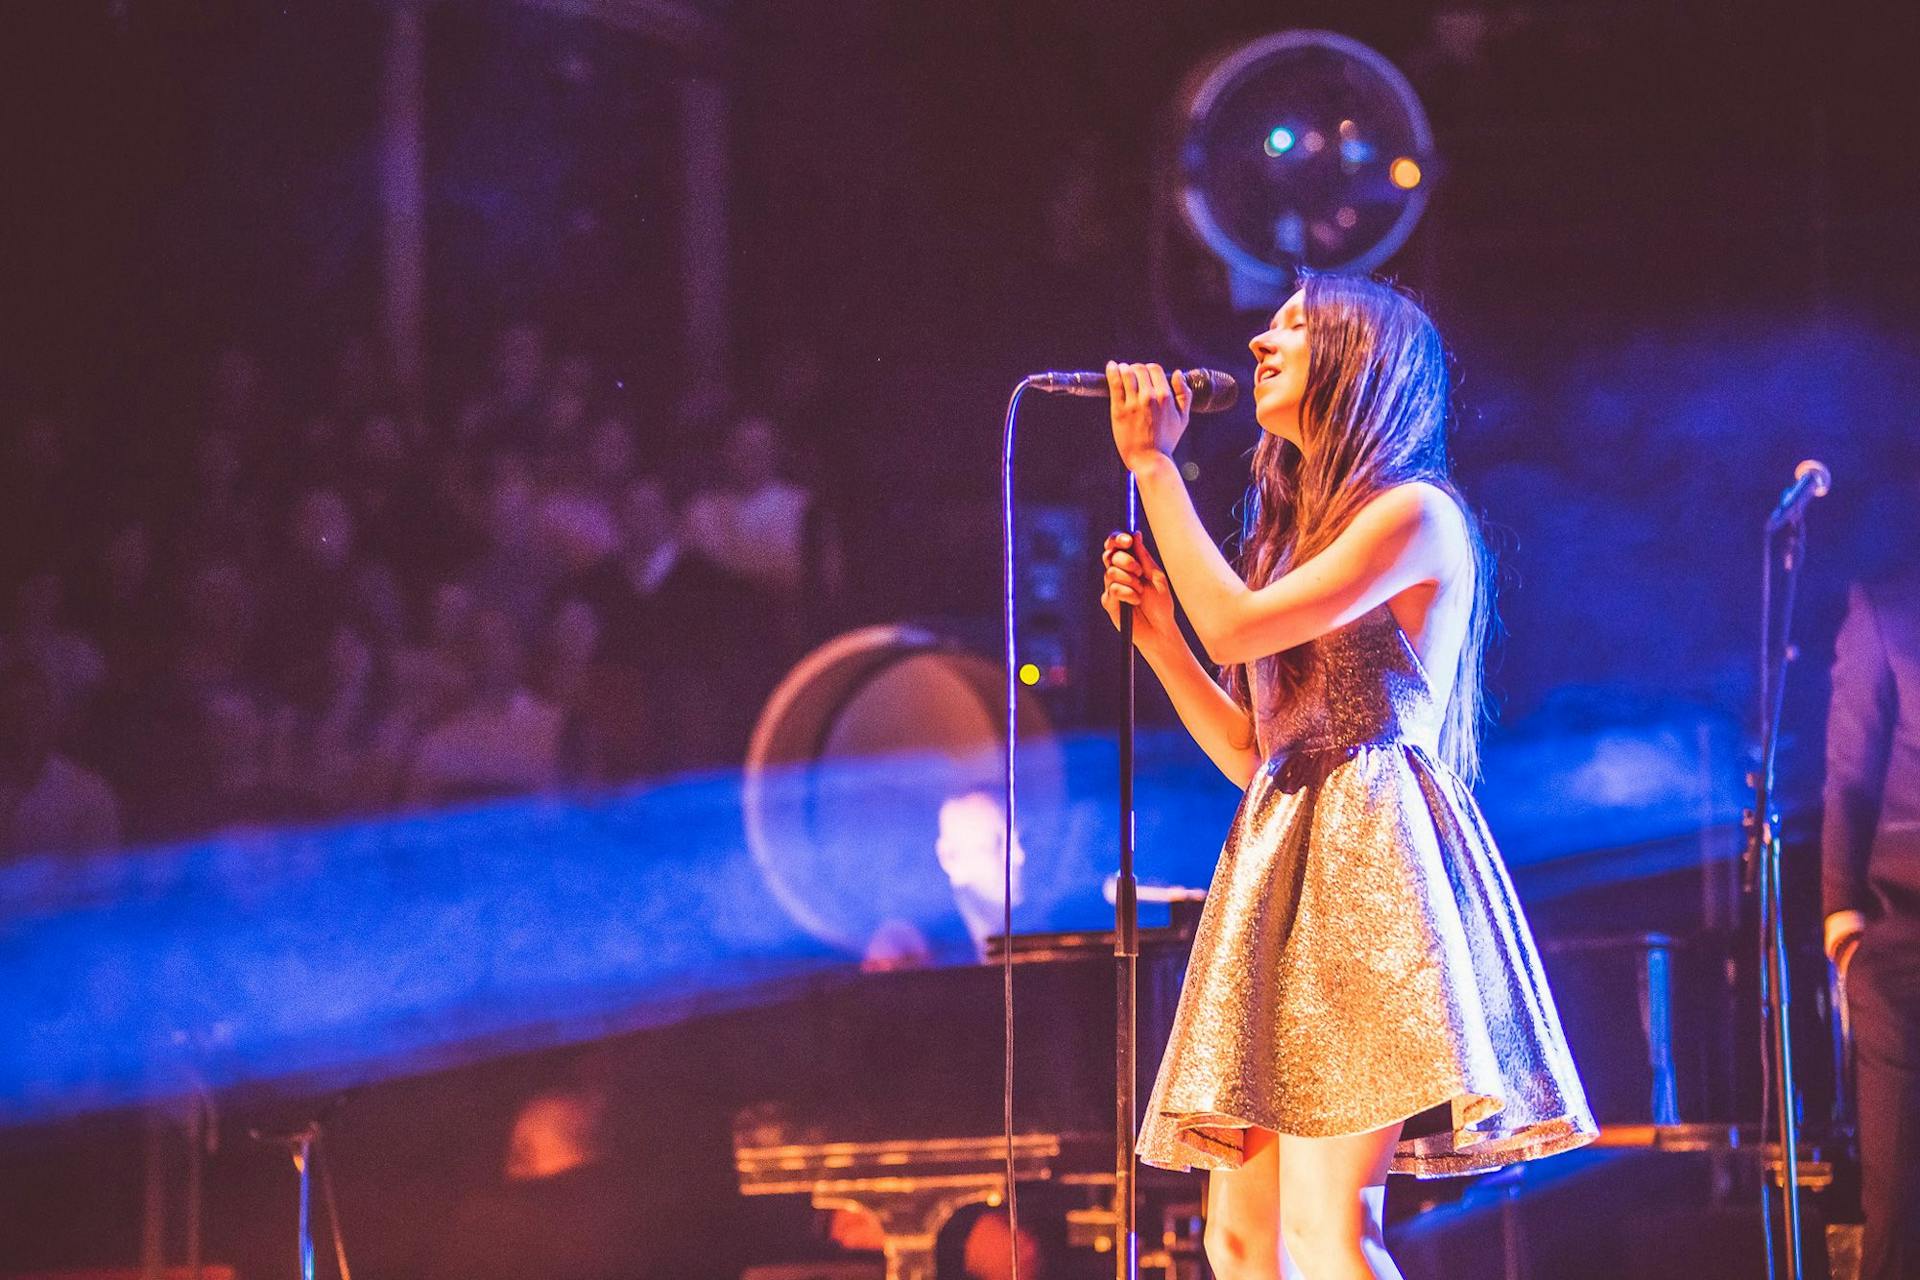 Natalie singing on the stage at The Royal Albert Hall